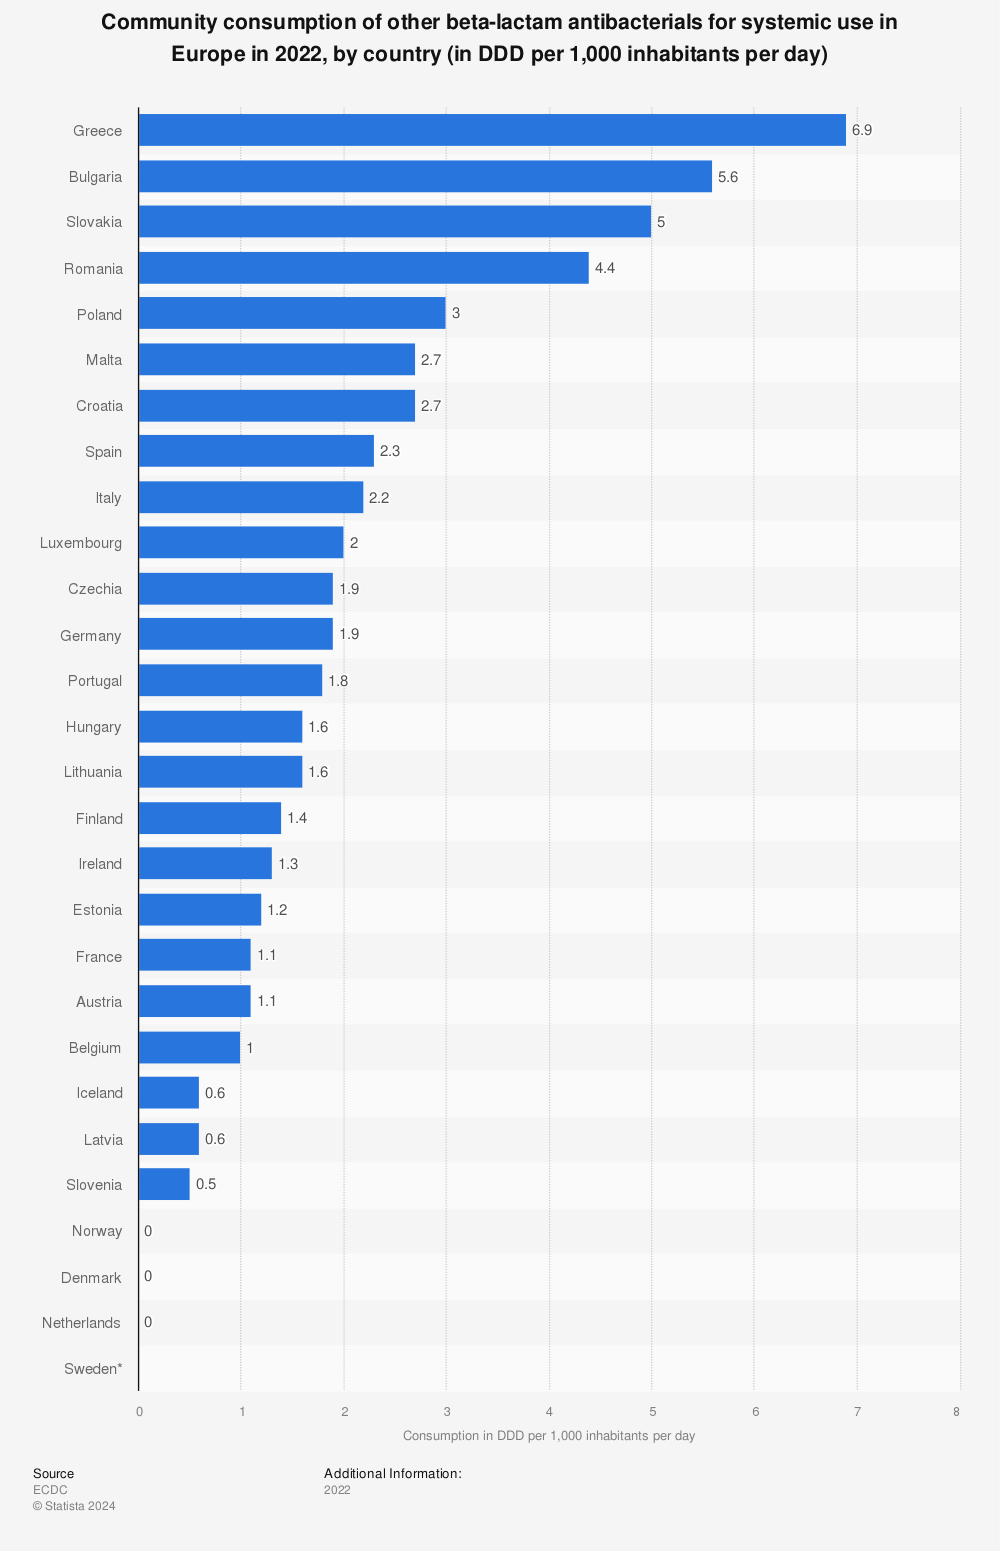 Statistic: Community consumption of other beta-lactam antibacterials for systemic use in Europe in 2022, by country (in DDD per 1,000 inhabitants per day) | Statista